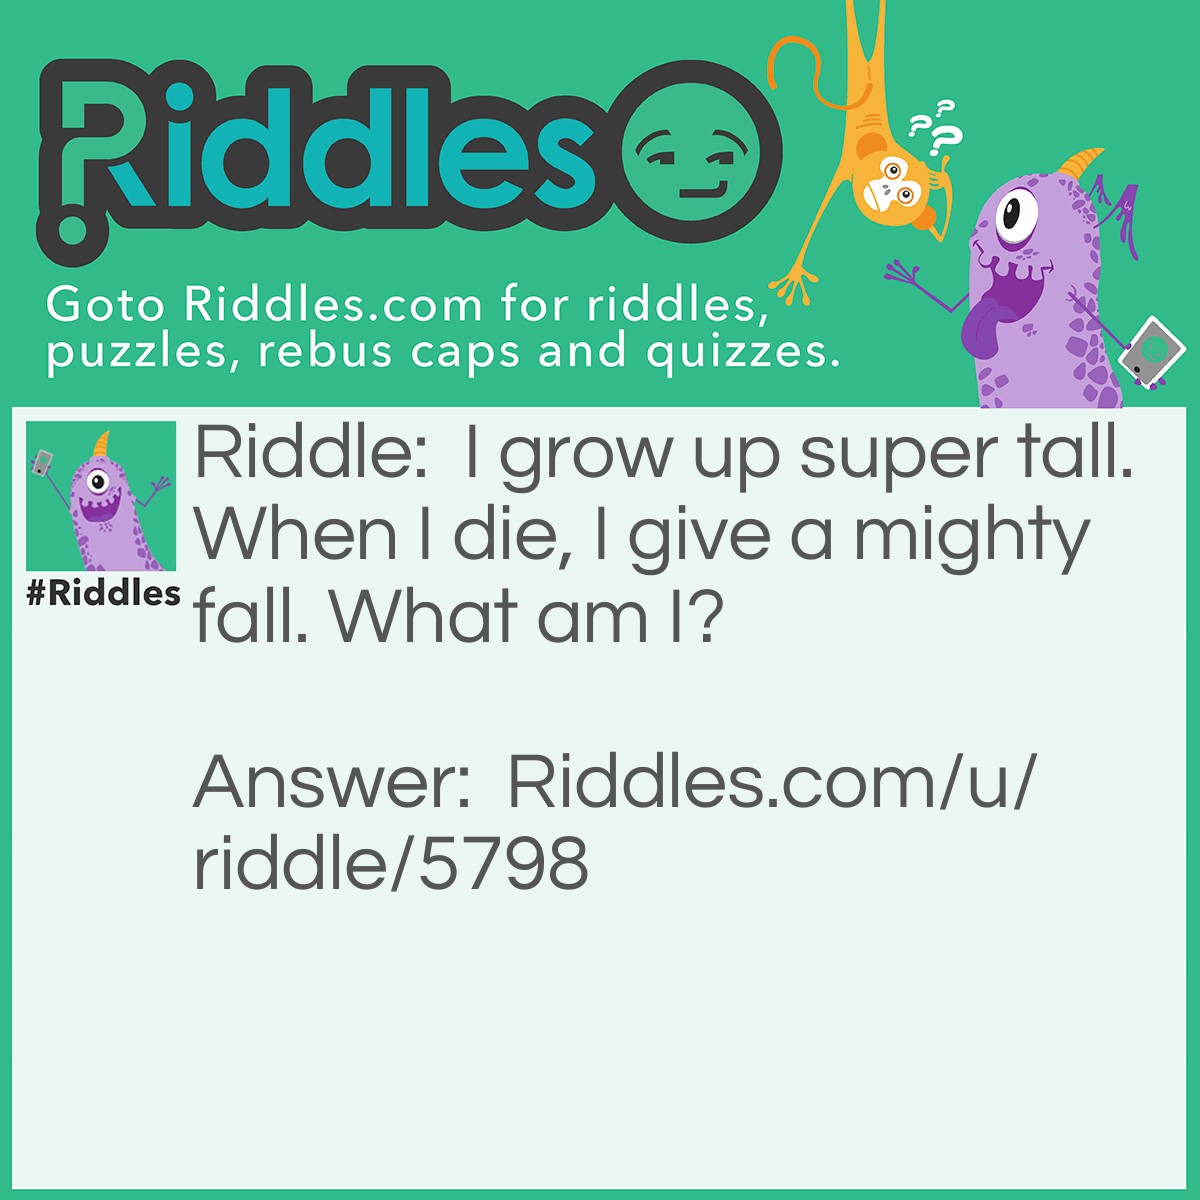 Riddle: I grow up super tall. When I die, I give a mighty fall. What am I? Answer: A tree.